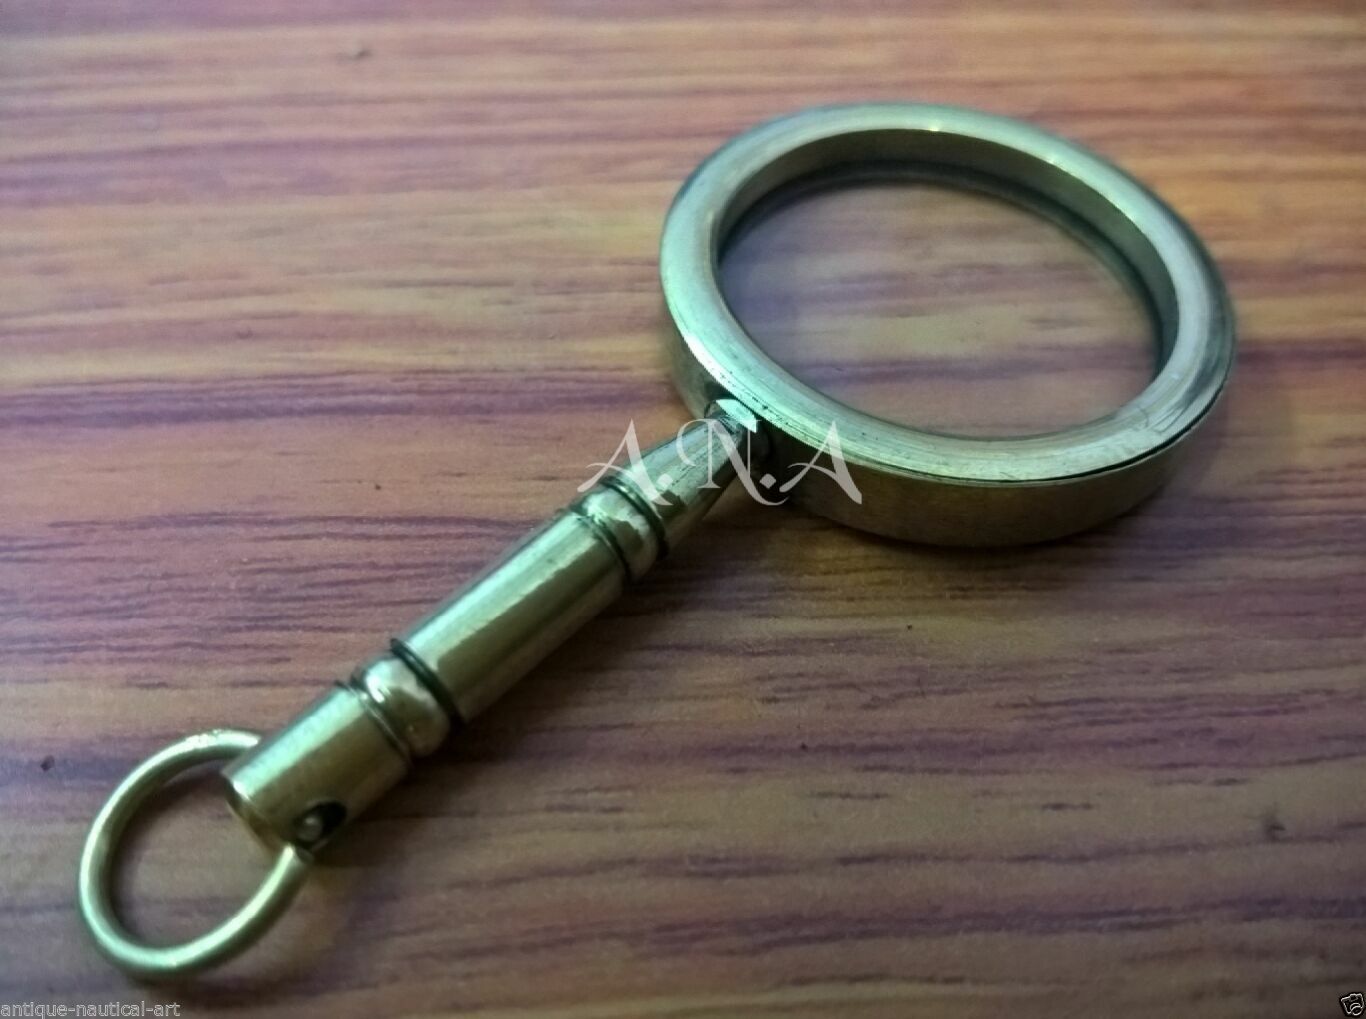 Lot Of 20 Pcs Brass Vintage Magnifier Key chain Collectible Magnifying Key Ring  Без бренда - фотография #5